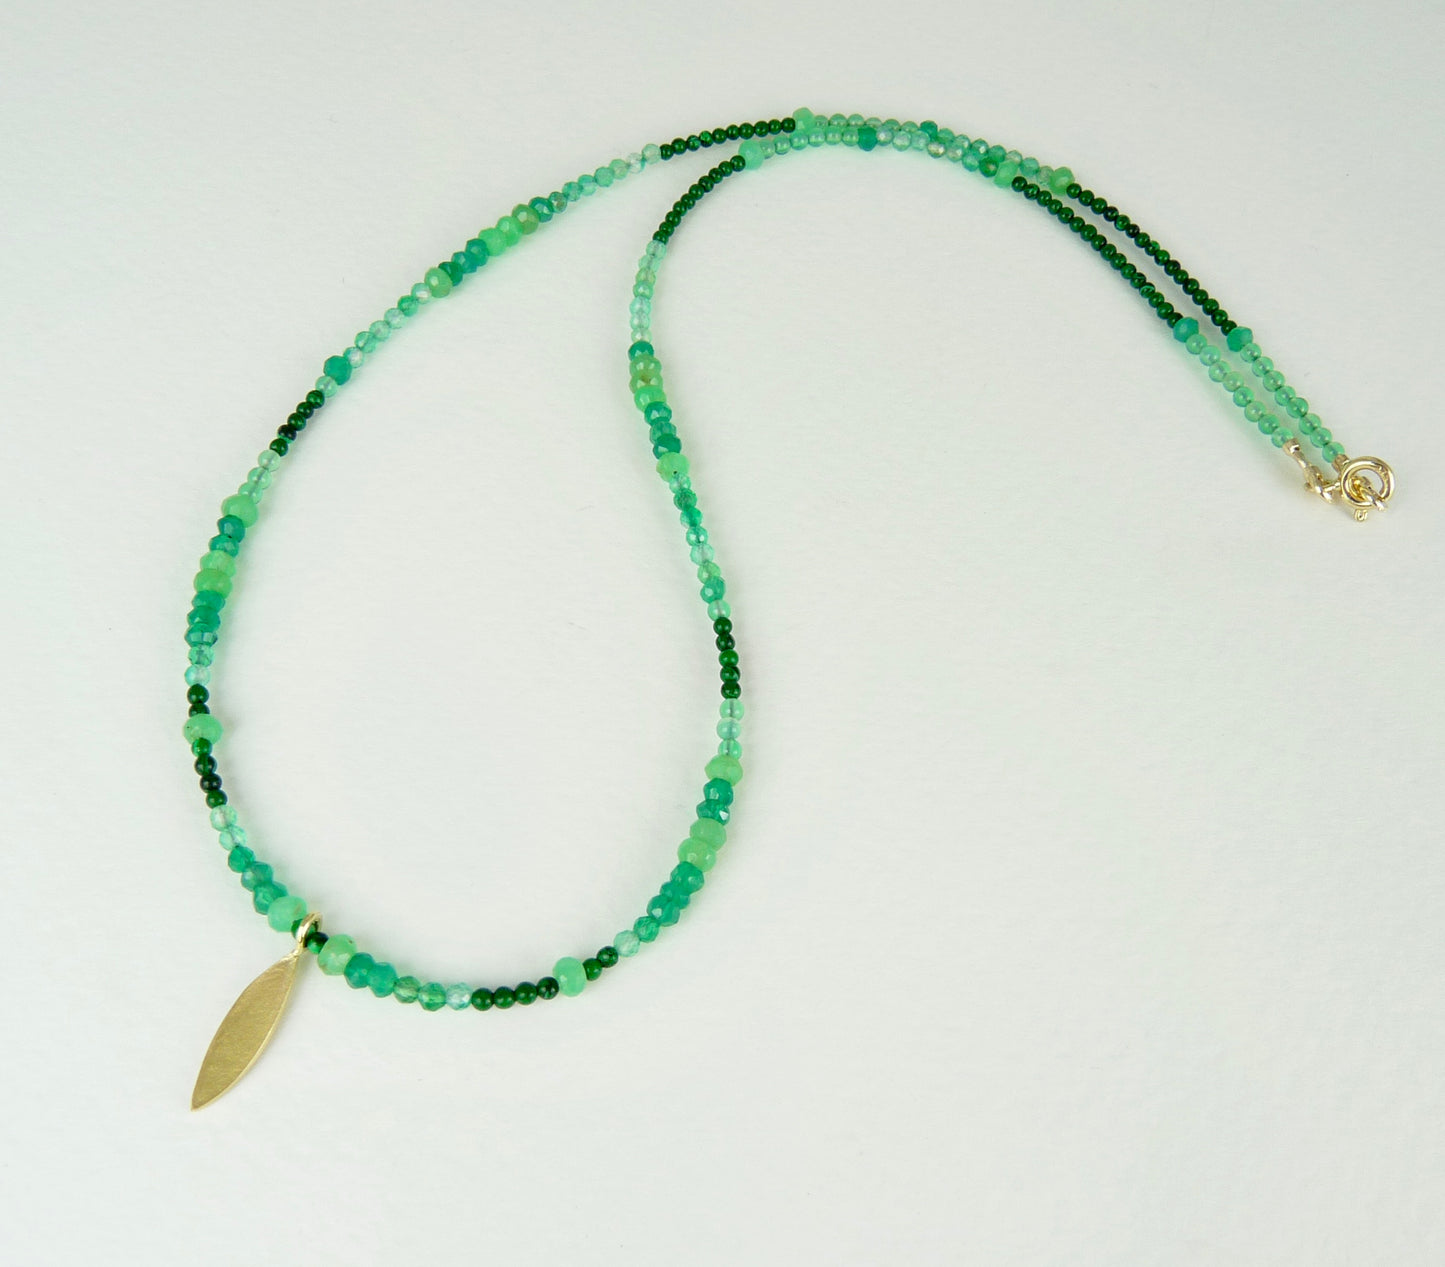 Green Gemstone Necklace with 18ct Gold Leaf Charm